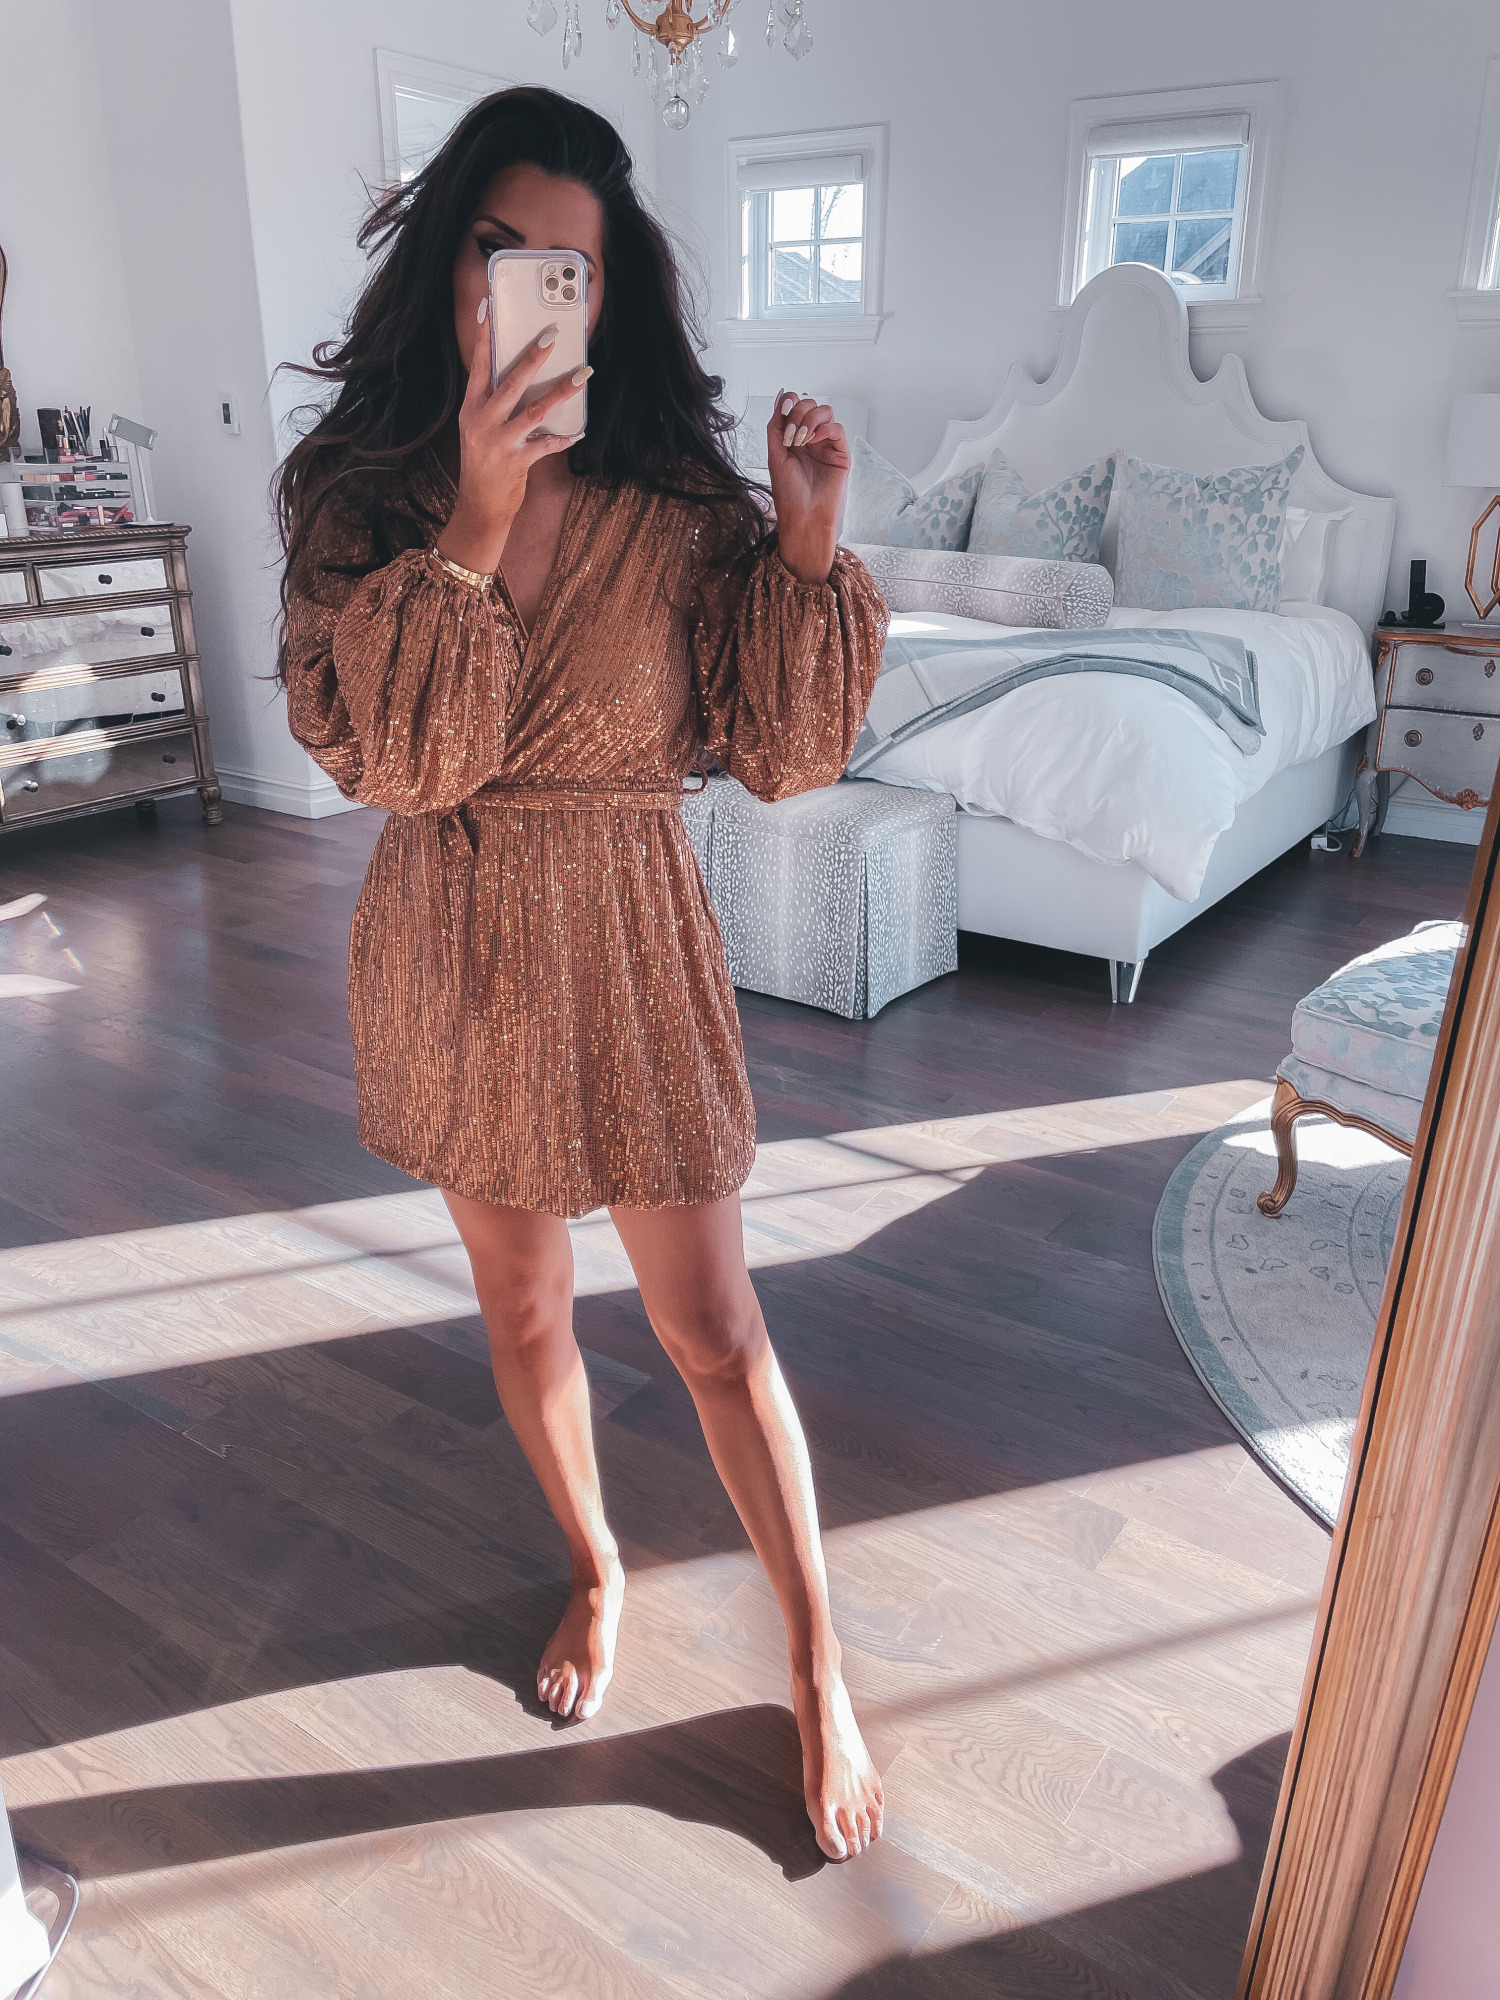 best black friday cyber monday sales 2020, top black friday sales 2020, emily gemma112 |2020 Black Friday Deals by popular US life and style blog, The Sweetest Thing: image of Emily Gemma wearing a copper color sequin dress. 